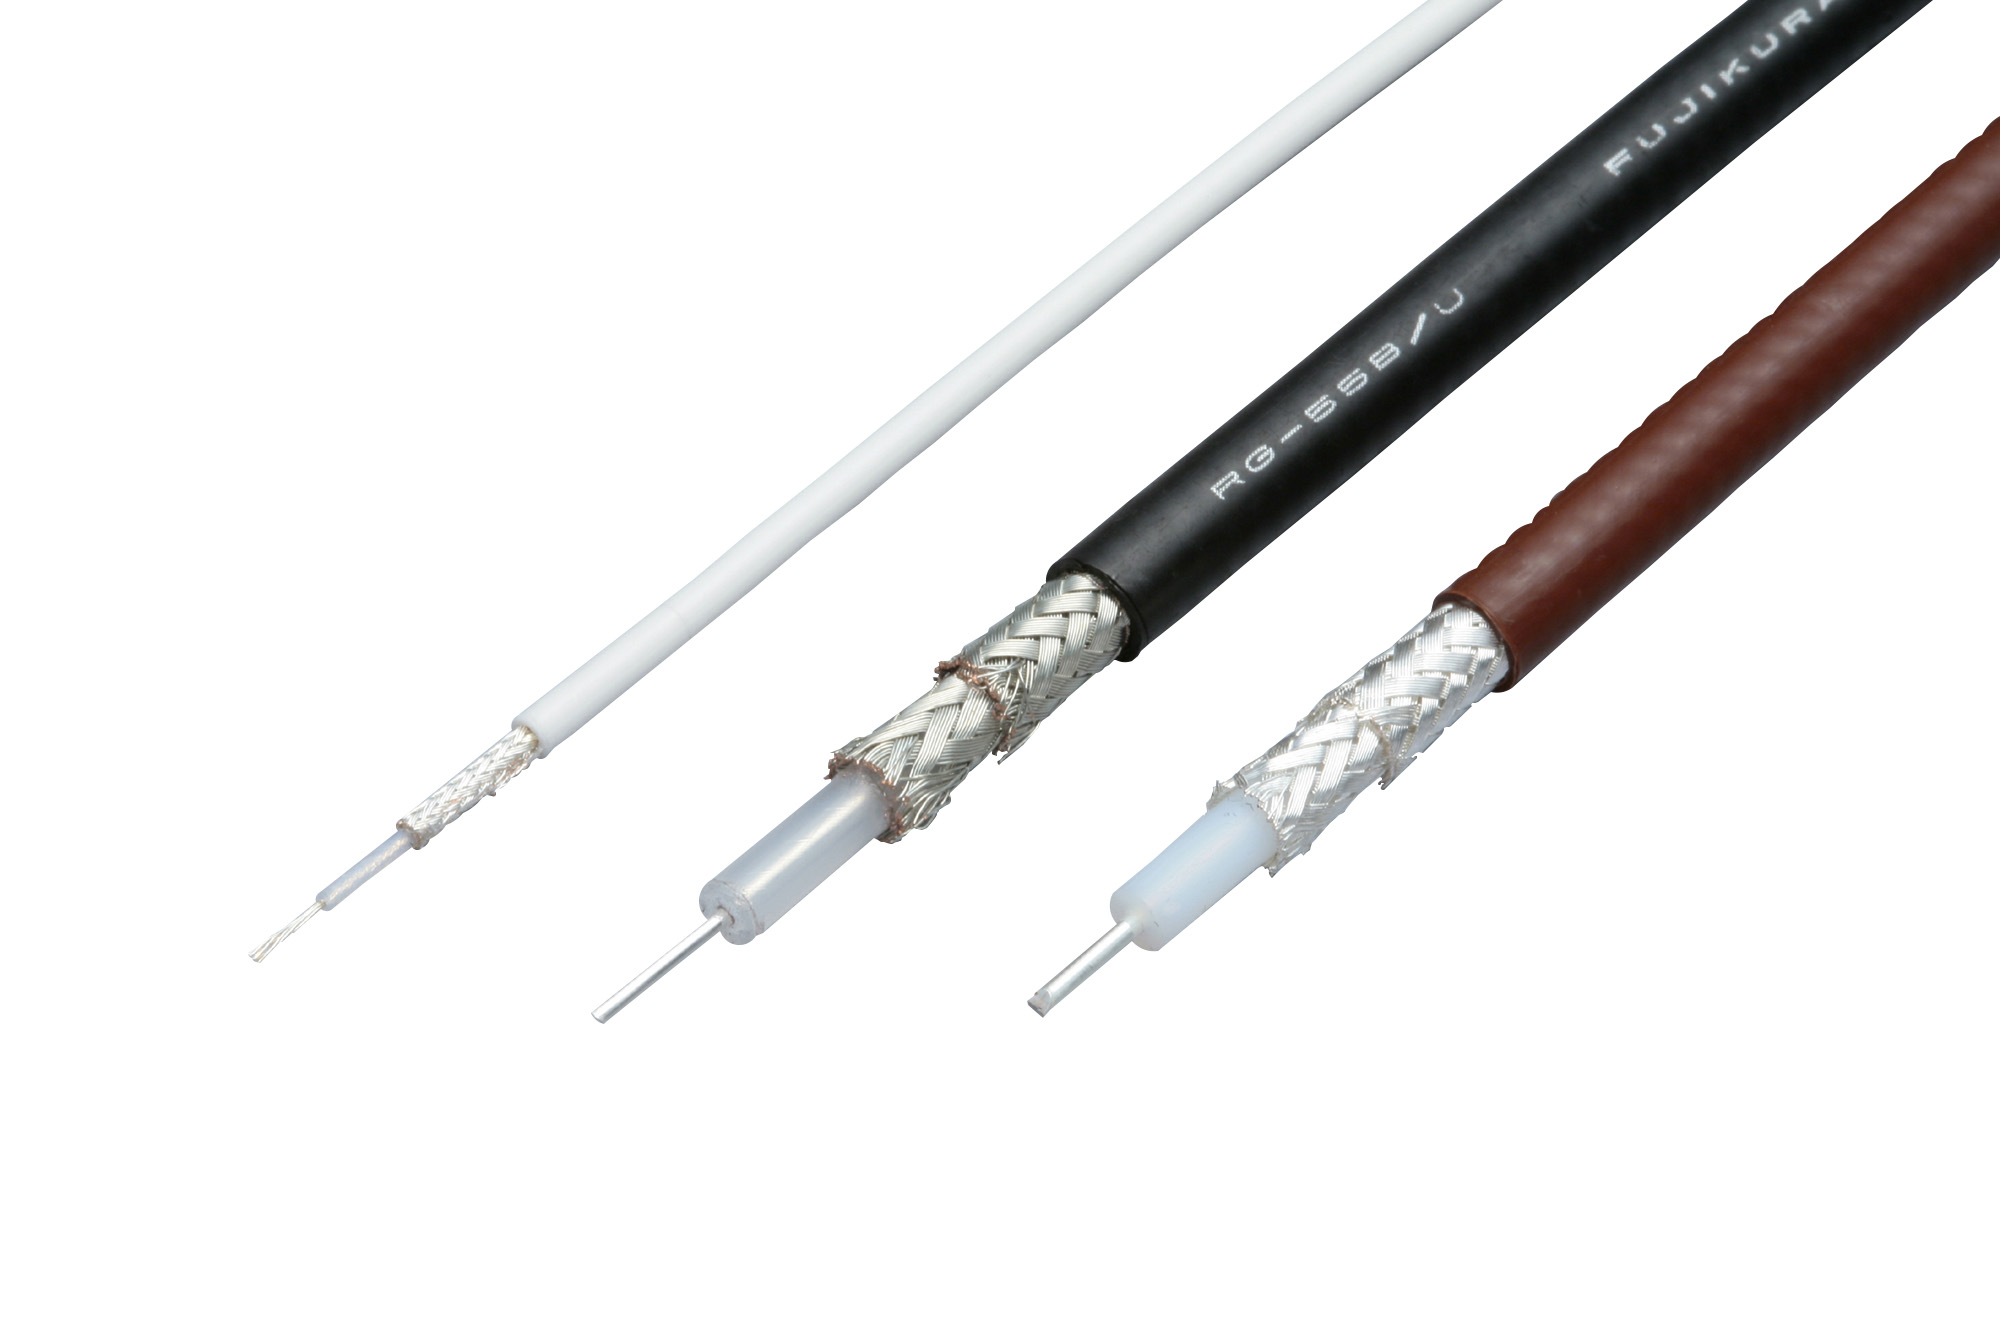 RG Type High Frequency Coaxial Cable